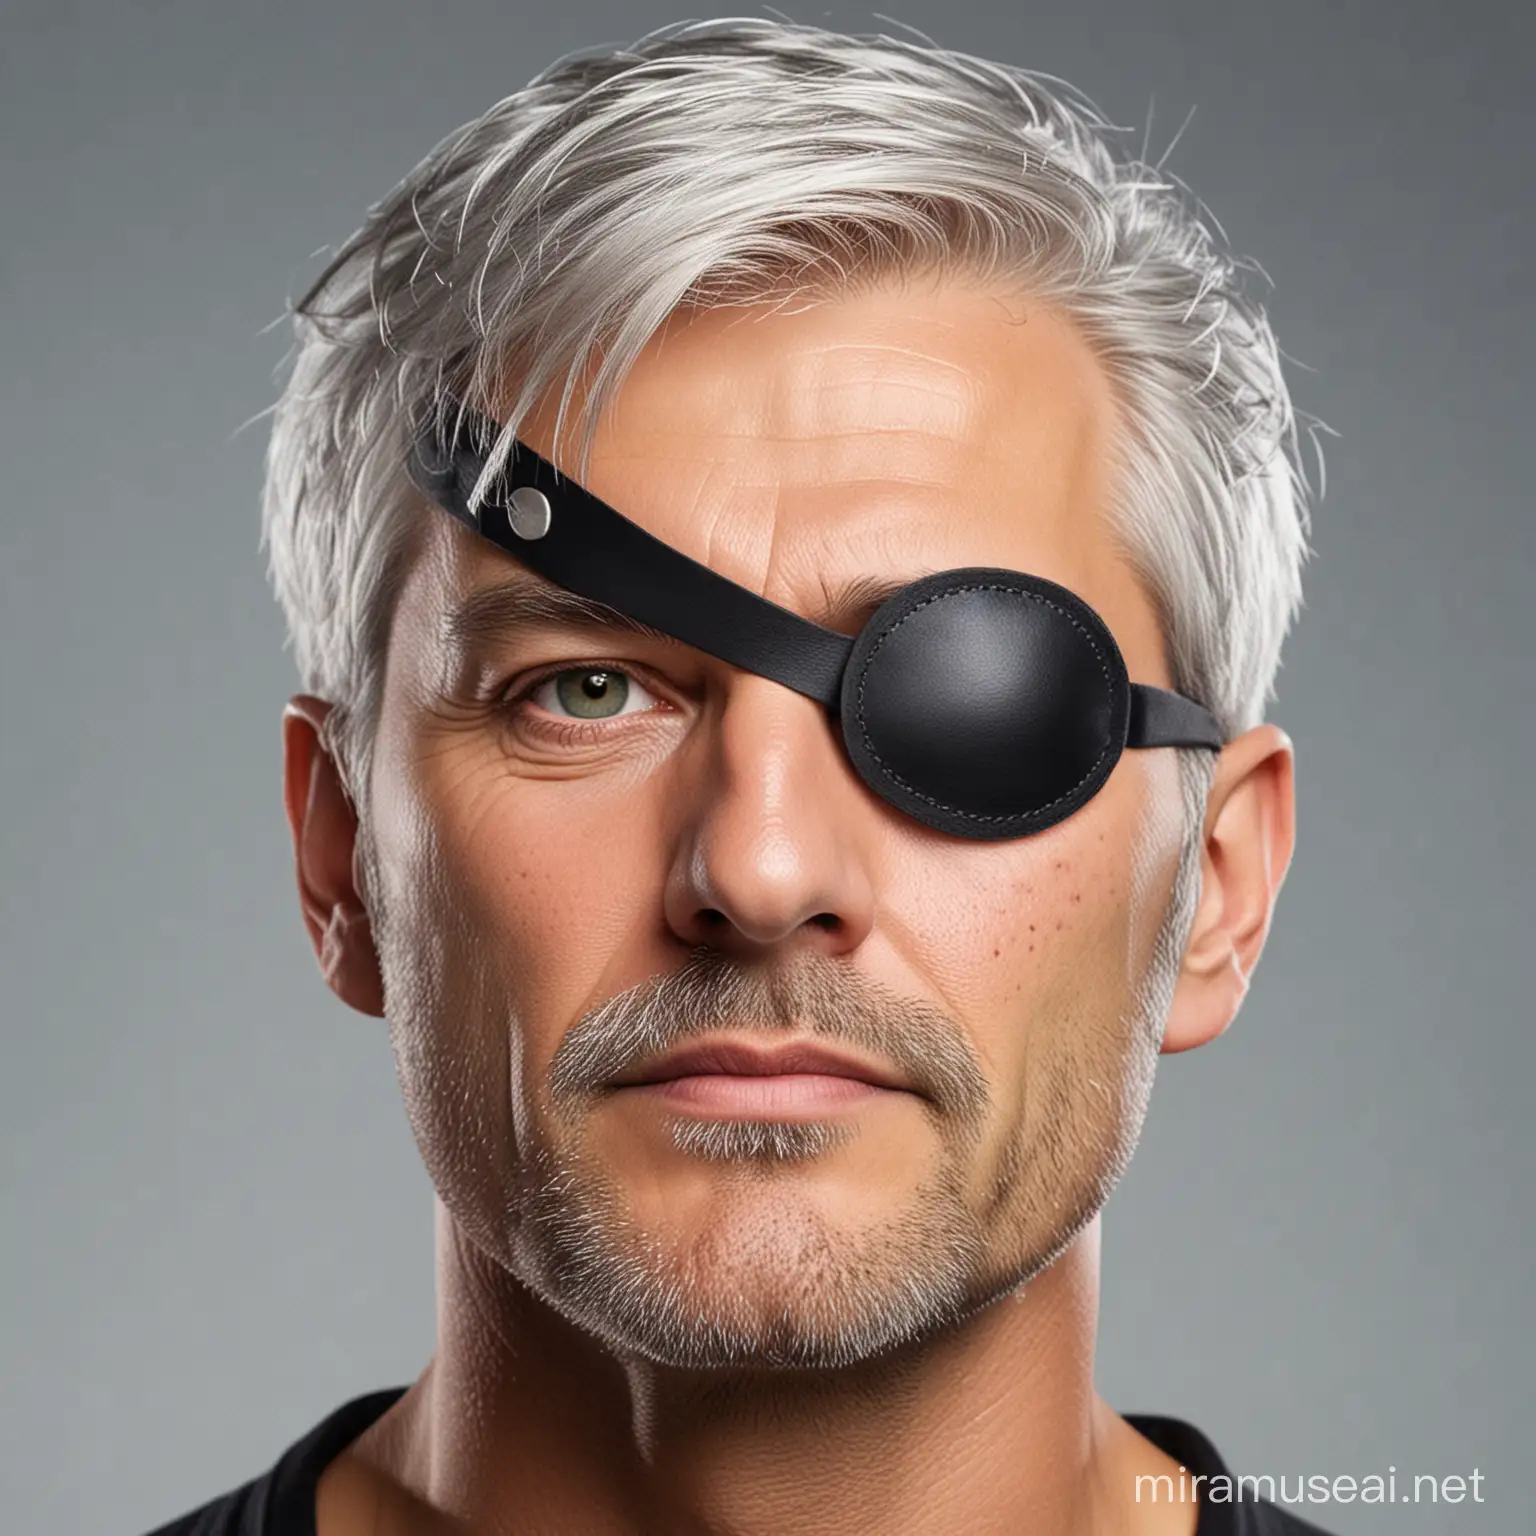 Elderly Man with Silver Hair and Eyepatch